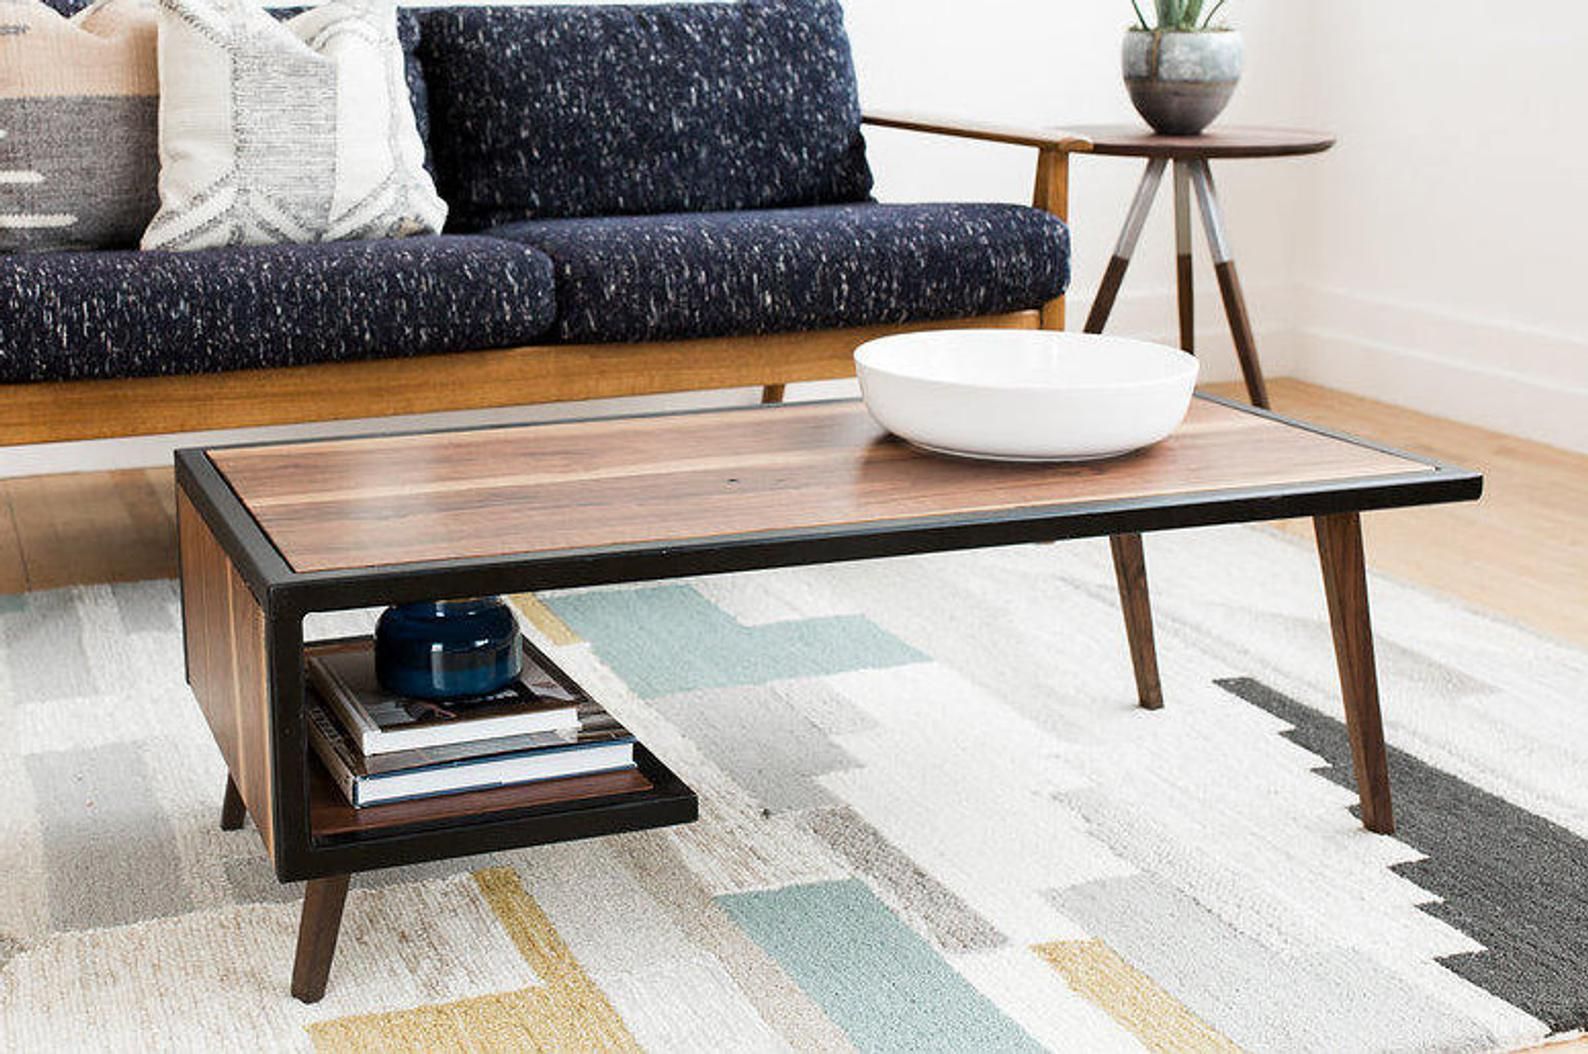 Mid Century Modern Style Coffee Tables You'Ll Love – Atomic Ranch With Regard To Wooden Mid Century Coffee Tables (View 4 of 15)